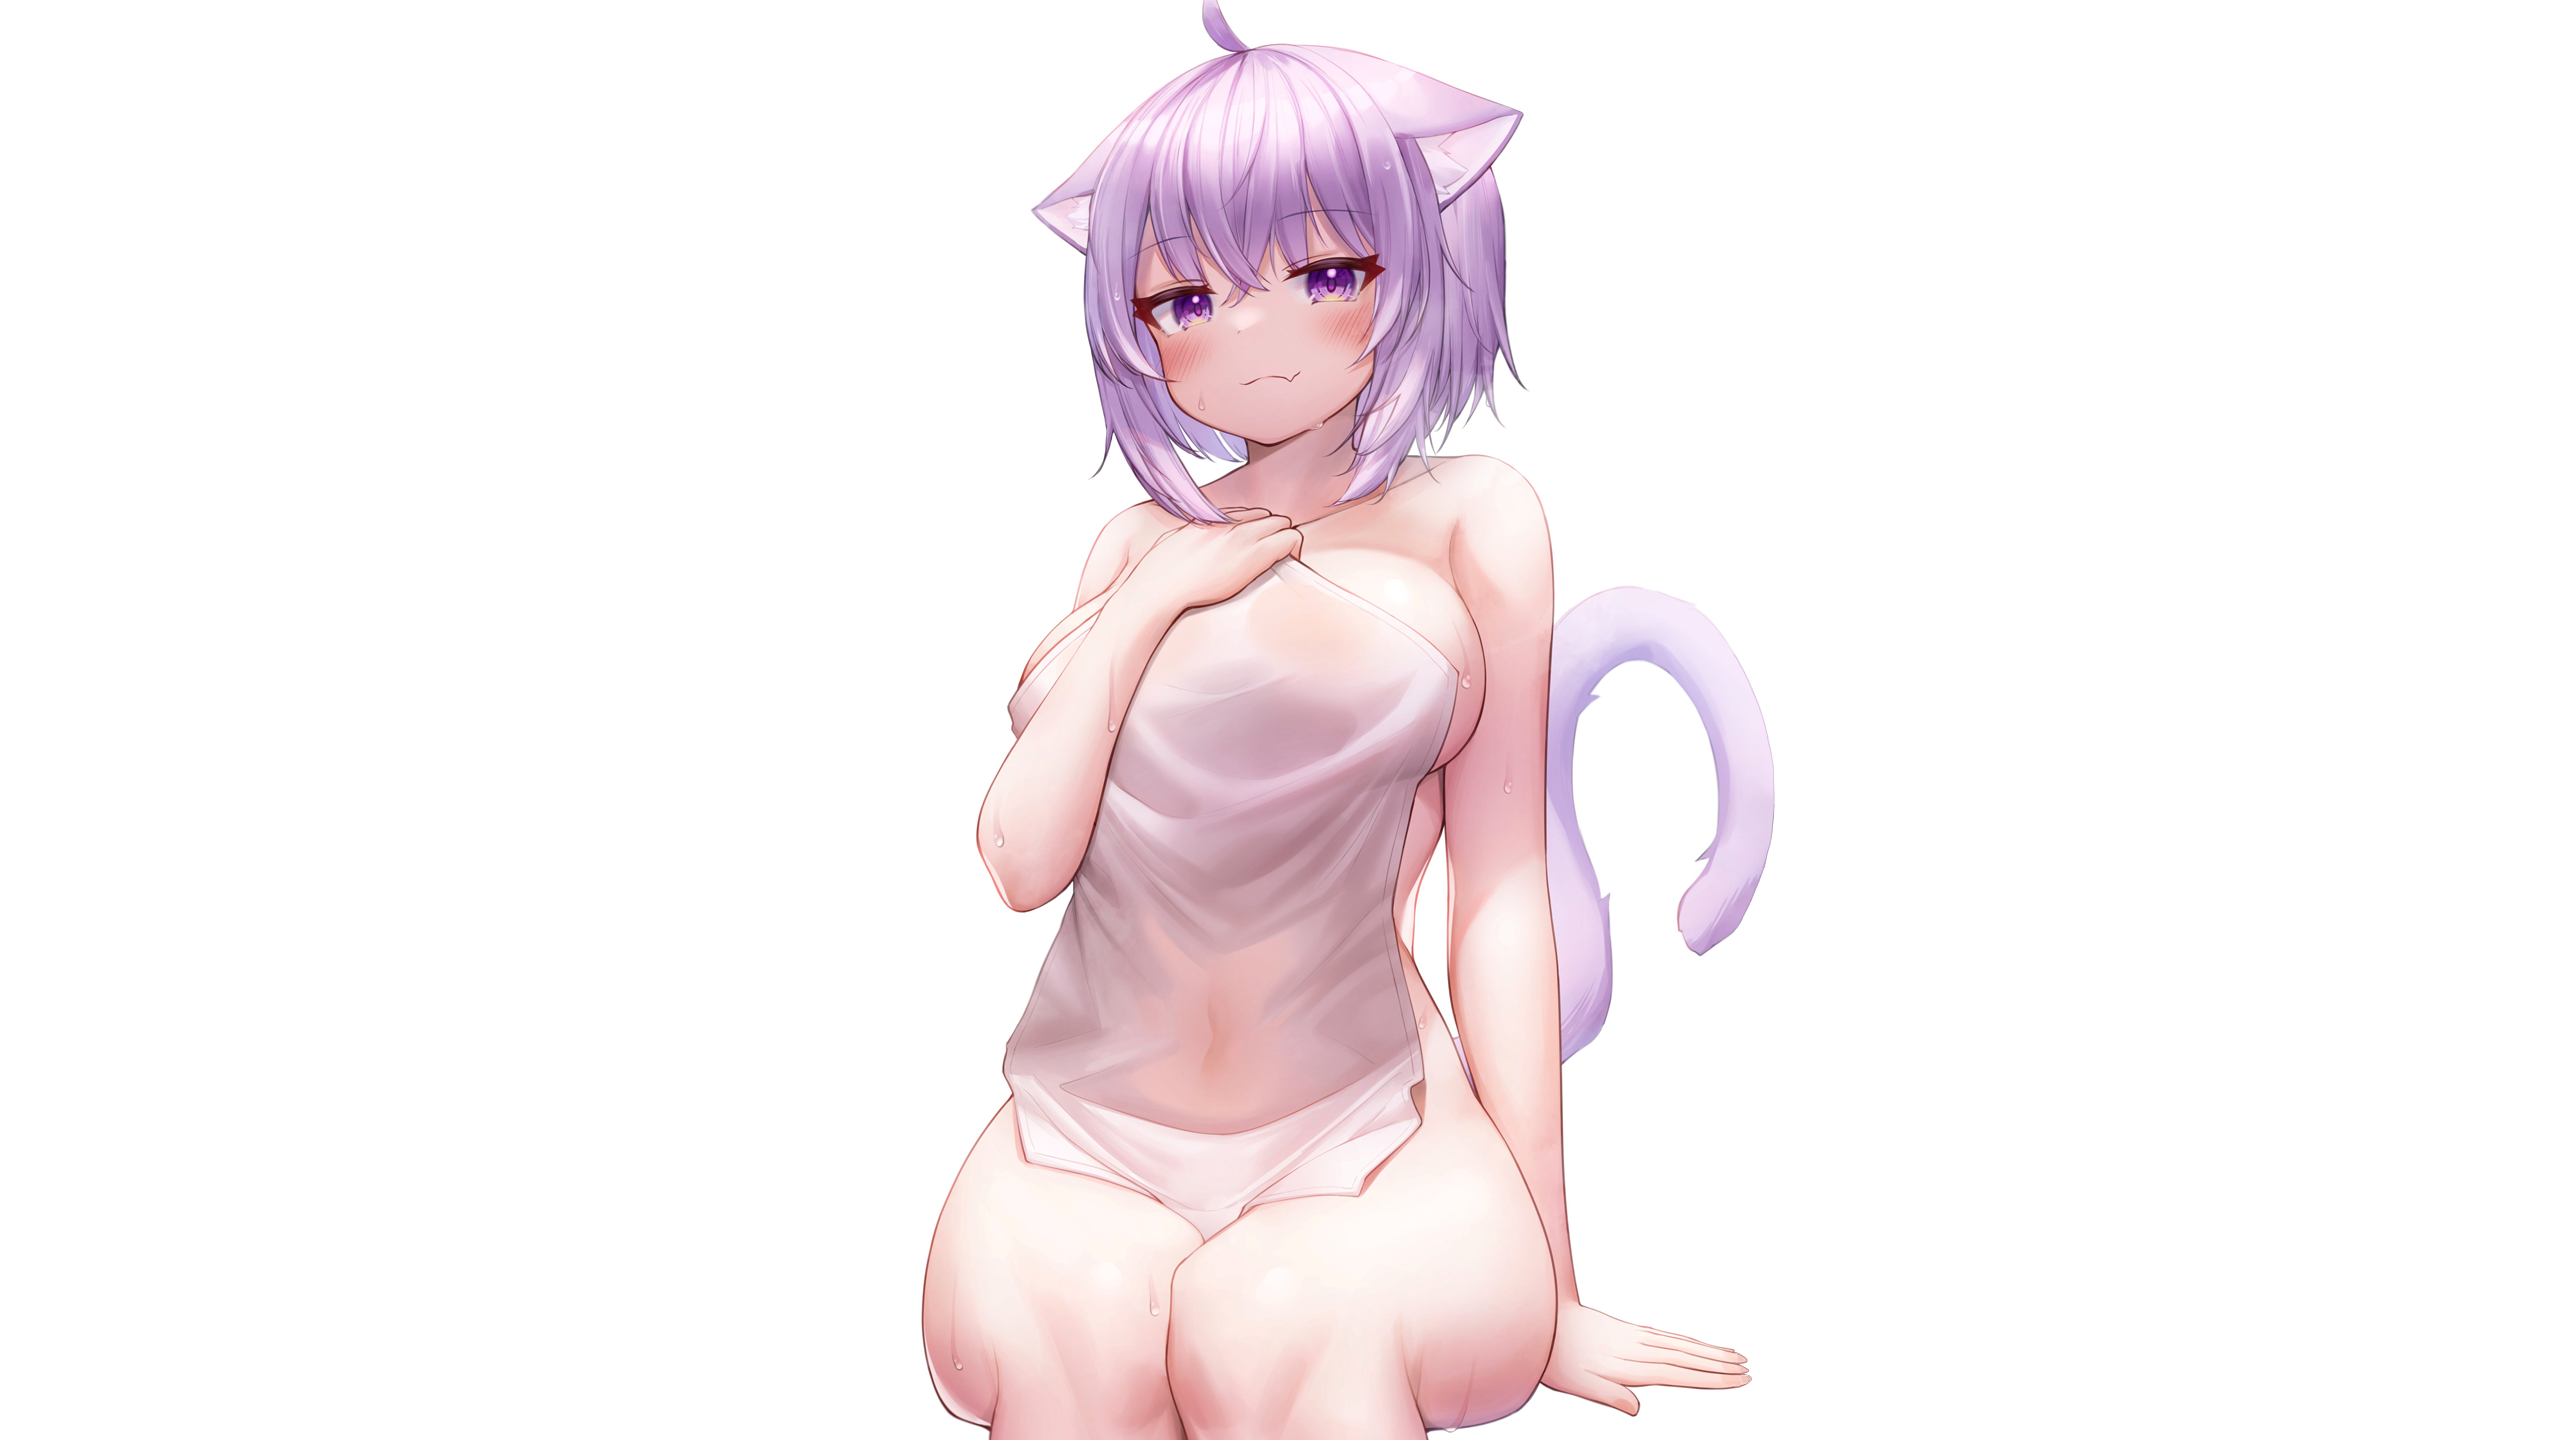 Anime Babe With Milky Tits - Nekomata Okayu, thighs, nude, big boobs, cat girl, Deaver, anime, anime  girls, ecchi, simple background, white background, Hololive, Virtual  Youtuber, cat ears, cat tail | 2560x1440 Wallpaper - wallhaven.cc